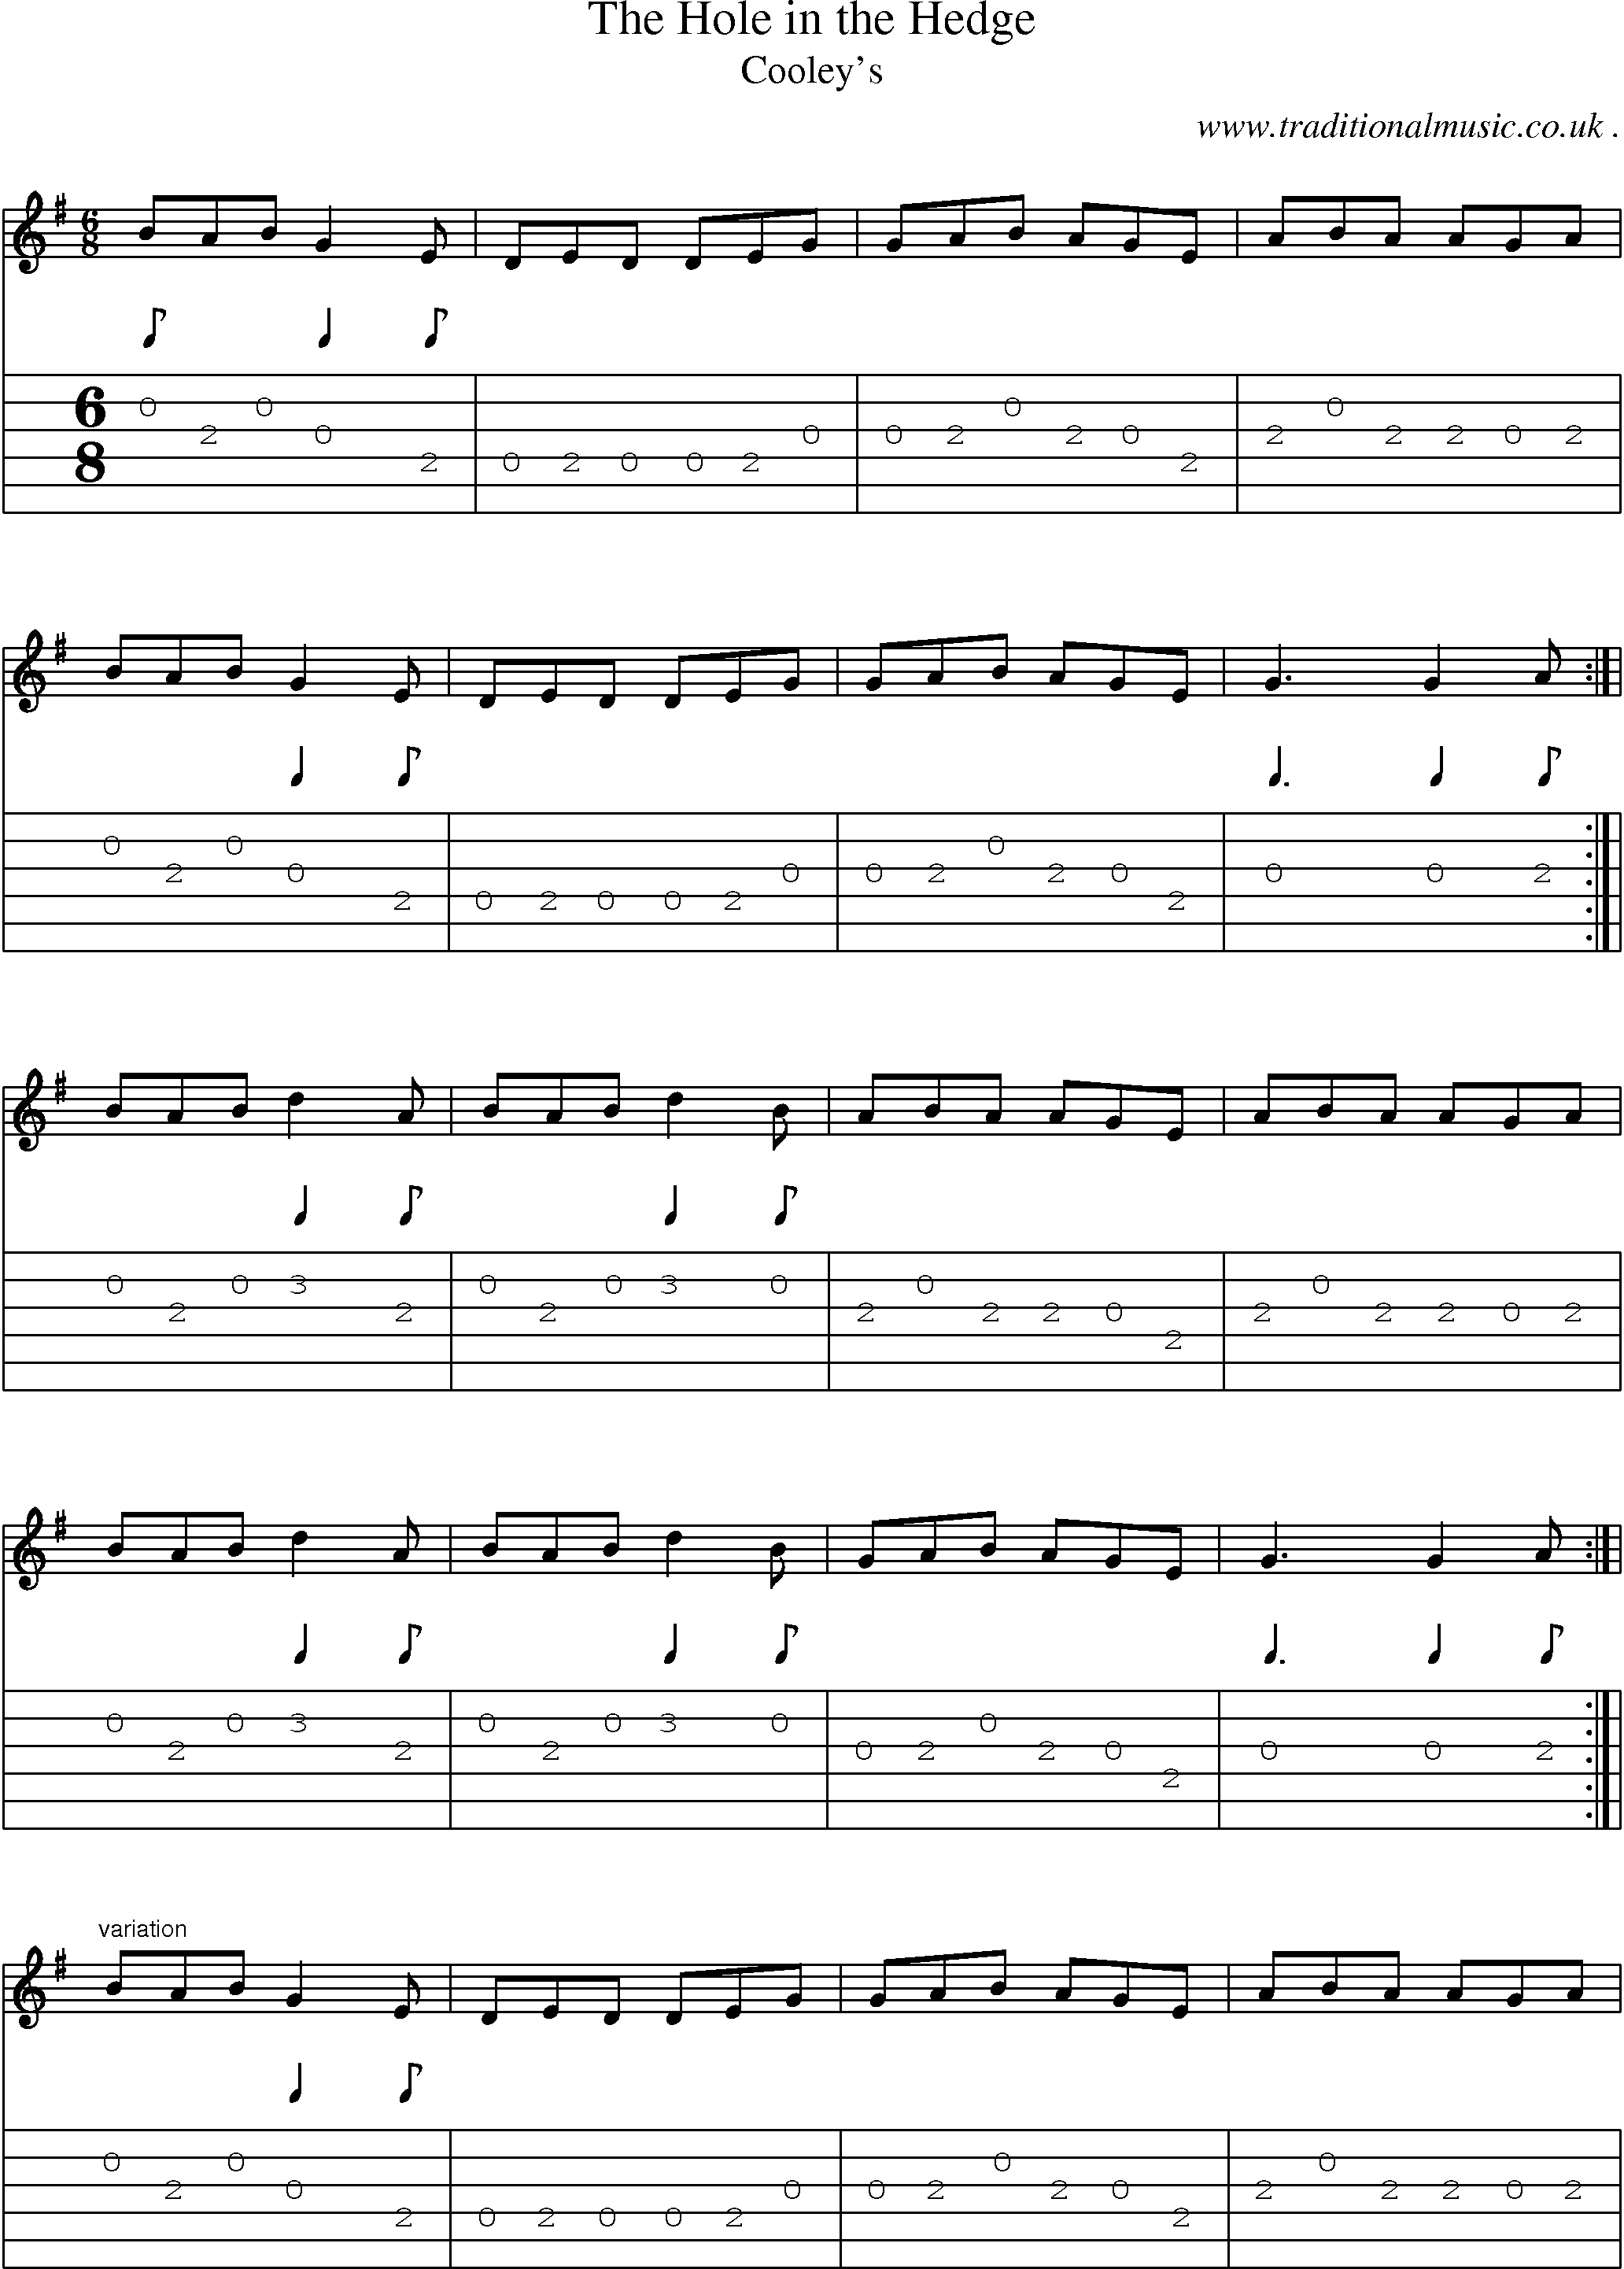 Sheet-Music and Guitar Tabs for The Hole In The Hedge